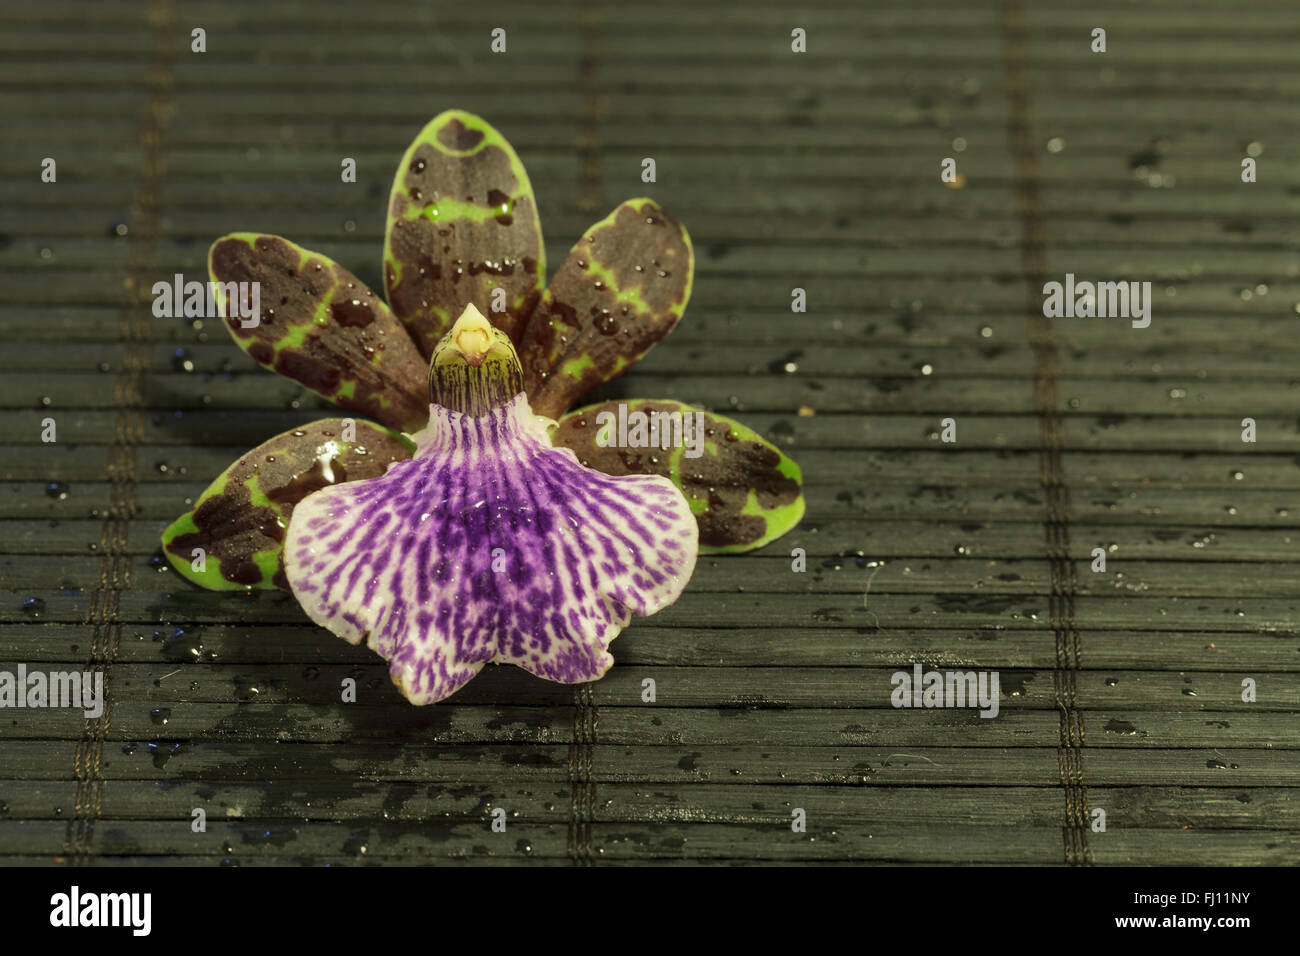 Purple and green orchid, Zygopetalum orchid species, on a black bamboo mat background Stock Photo